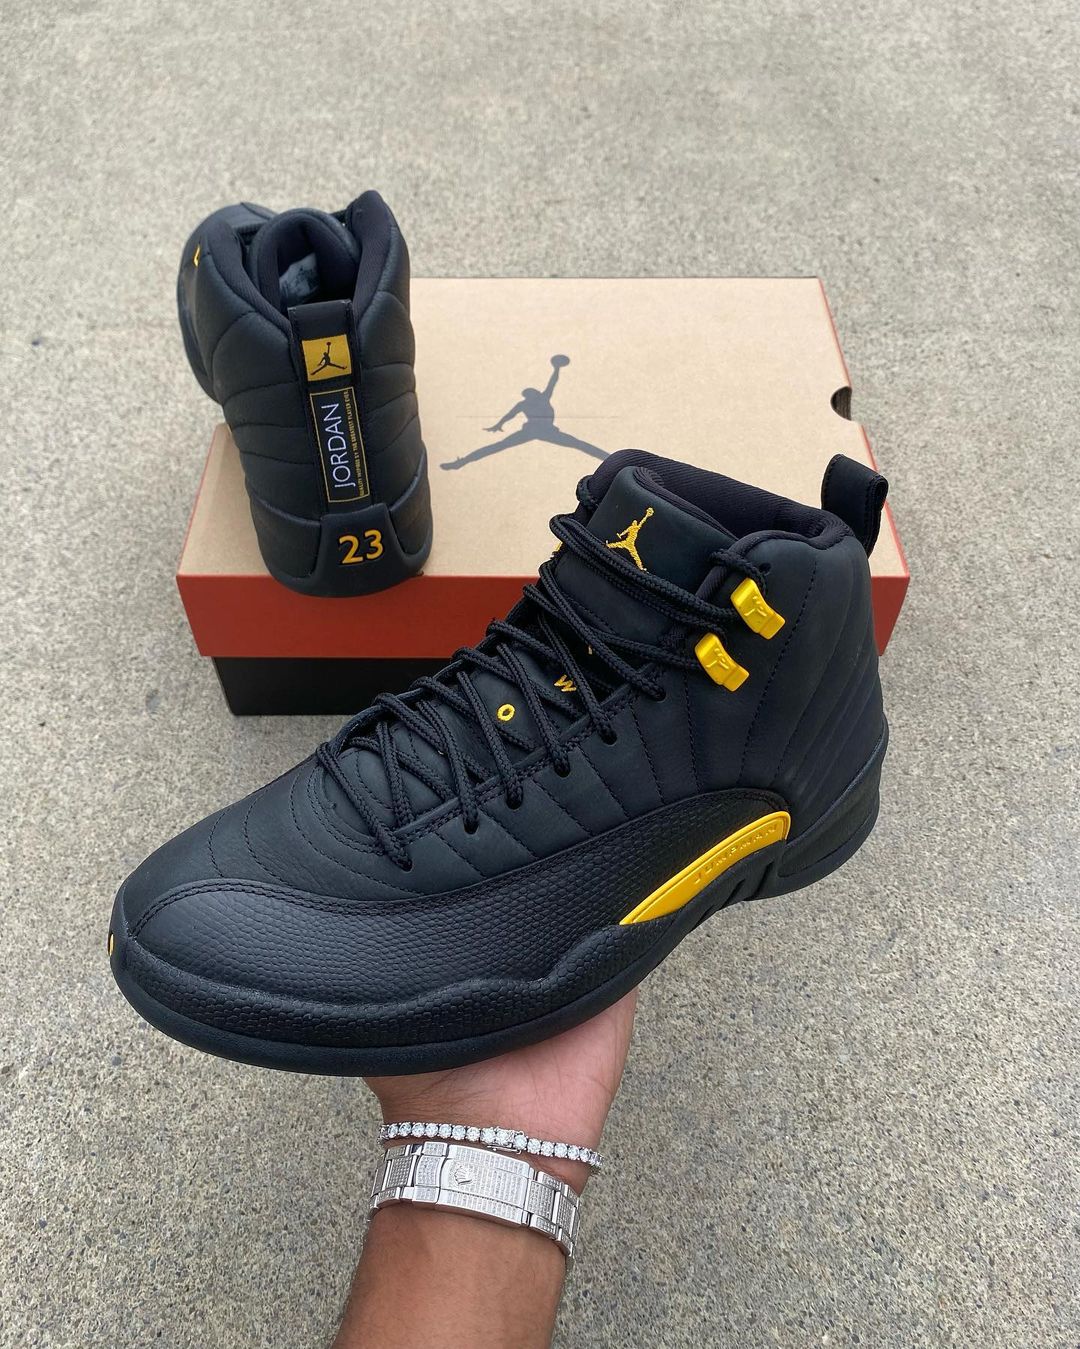 An Air Jordan 12 Black Taxi Is Supposedly Dropping in October